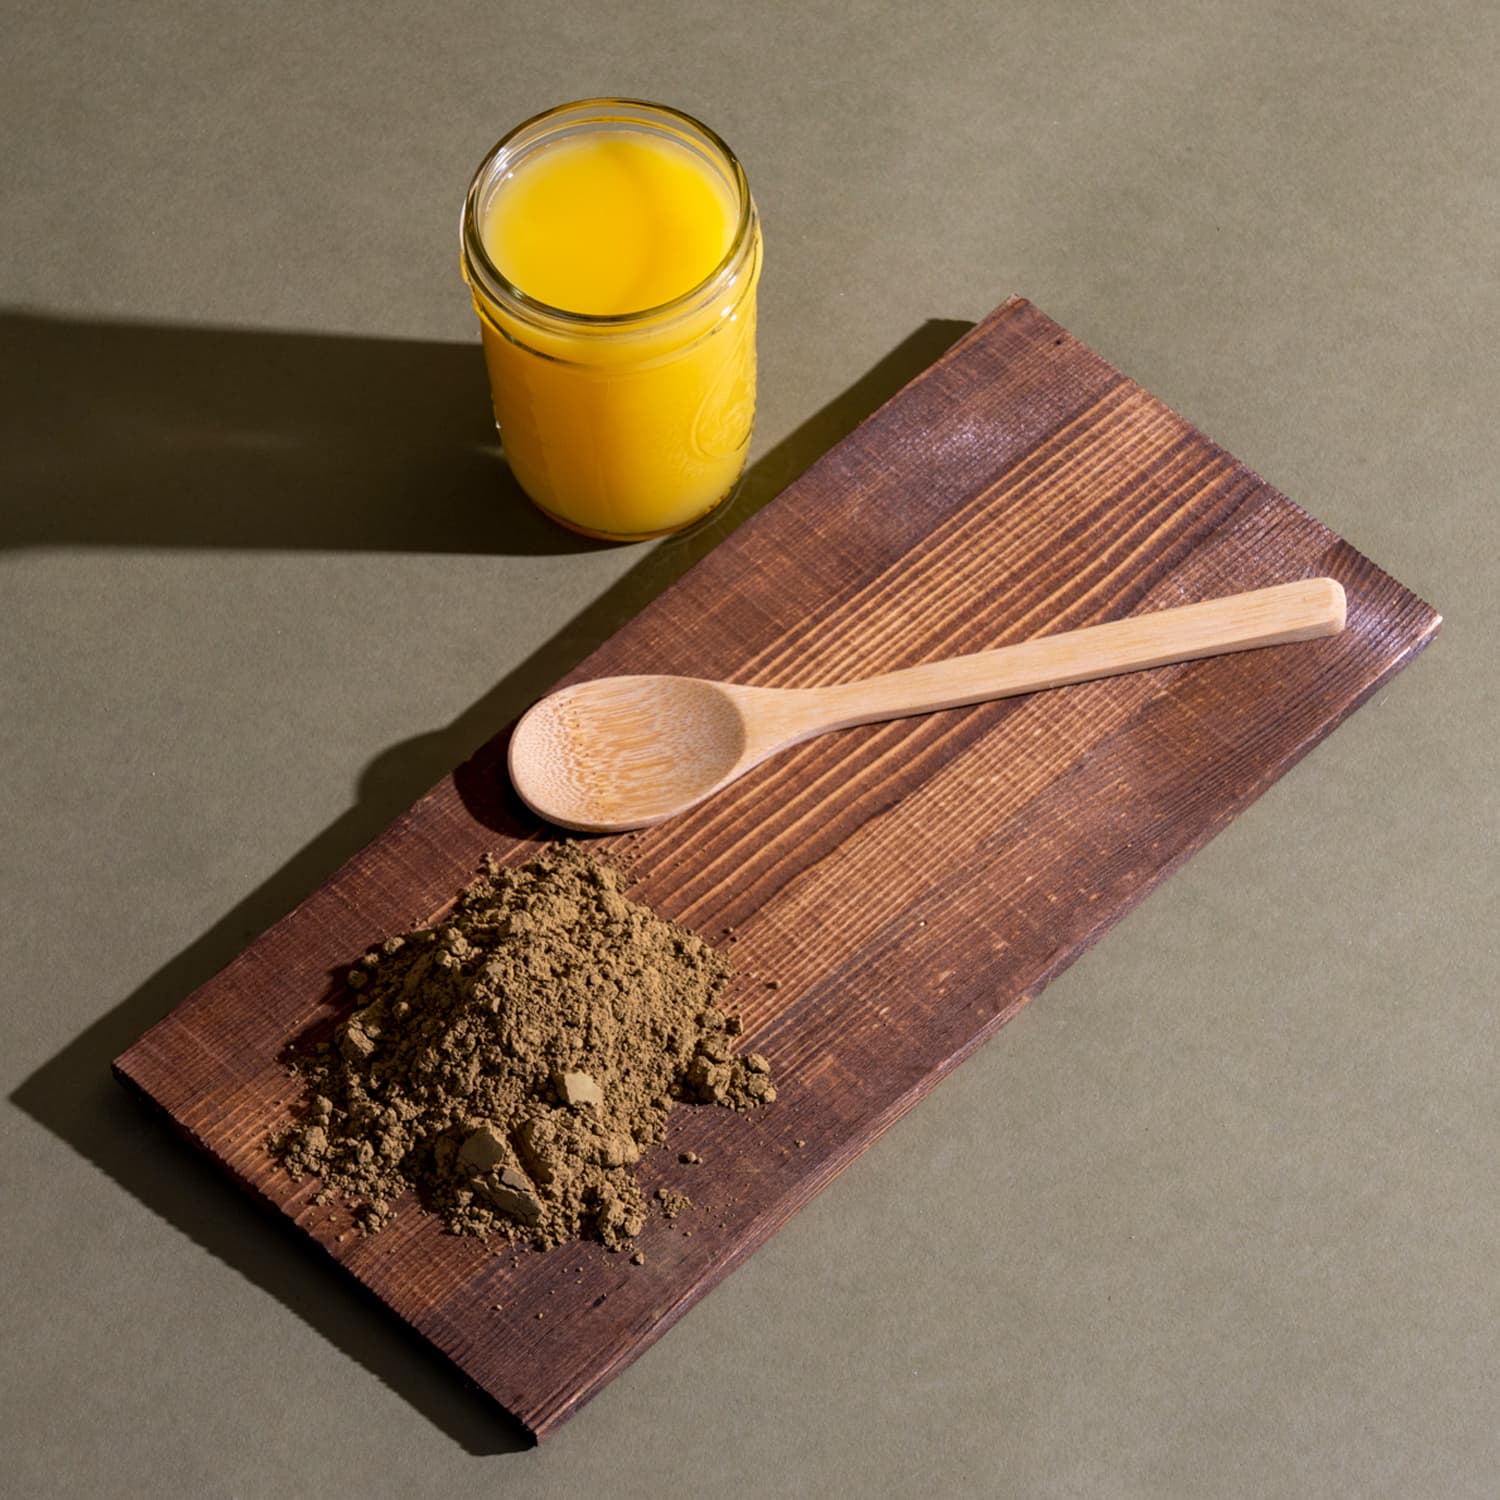 Wooden cutting board with a spoon and brown powder next to a glass of orange juice